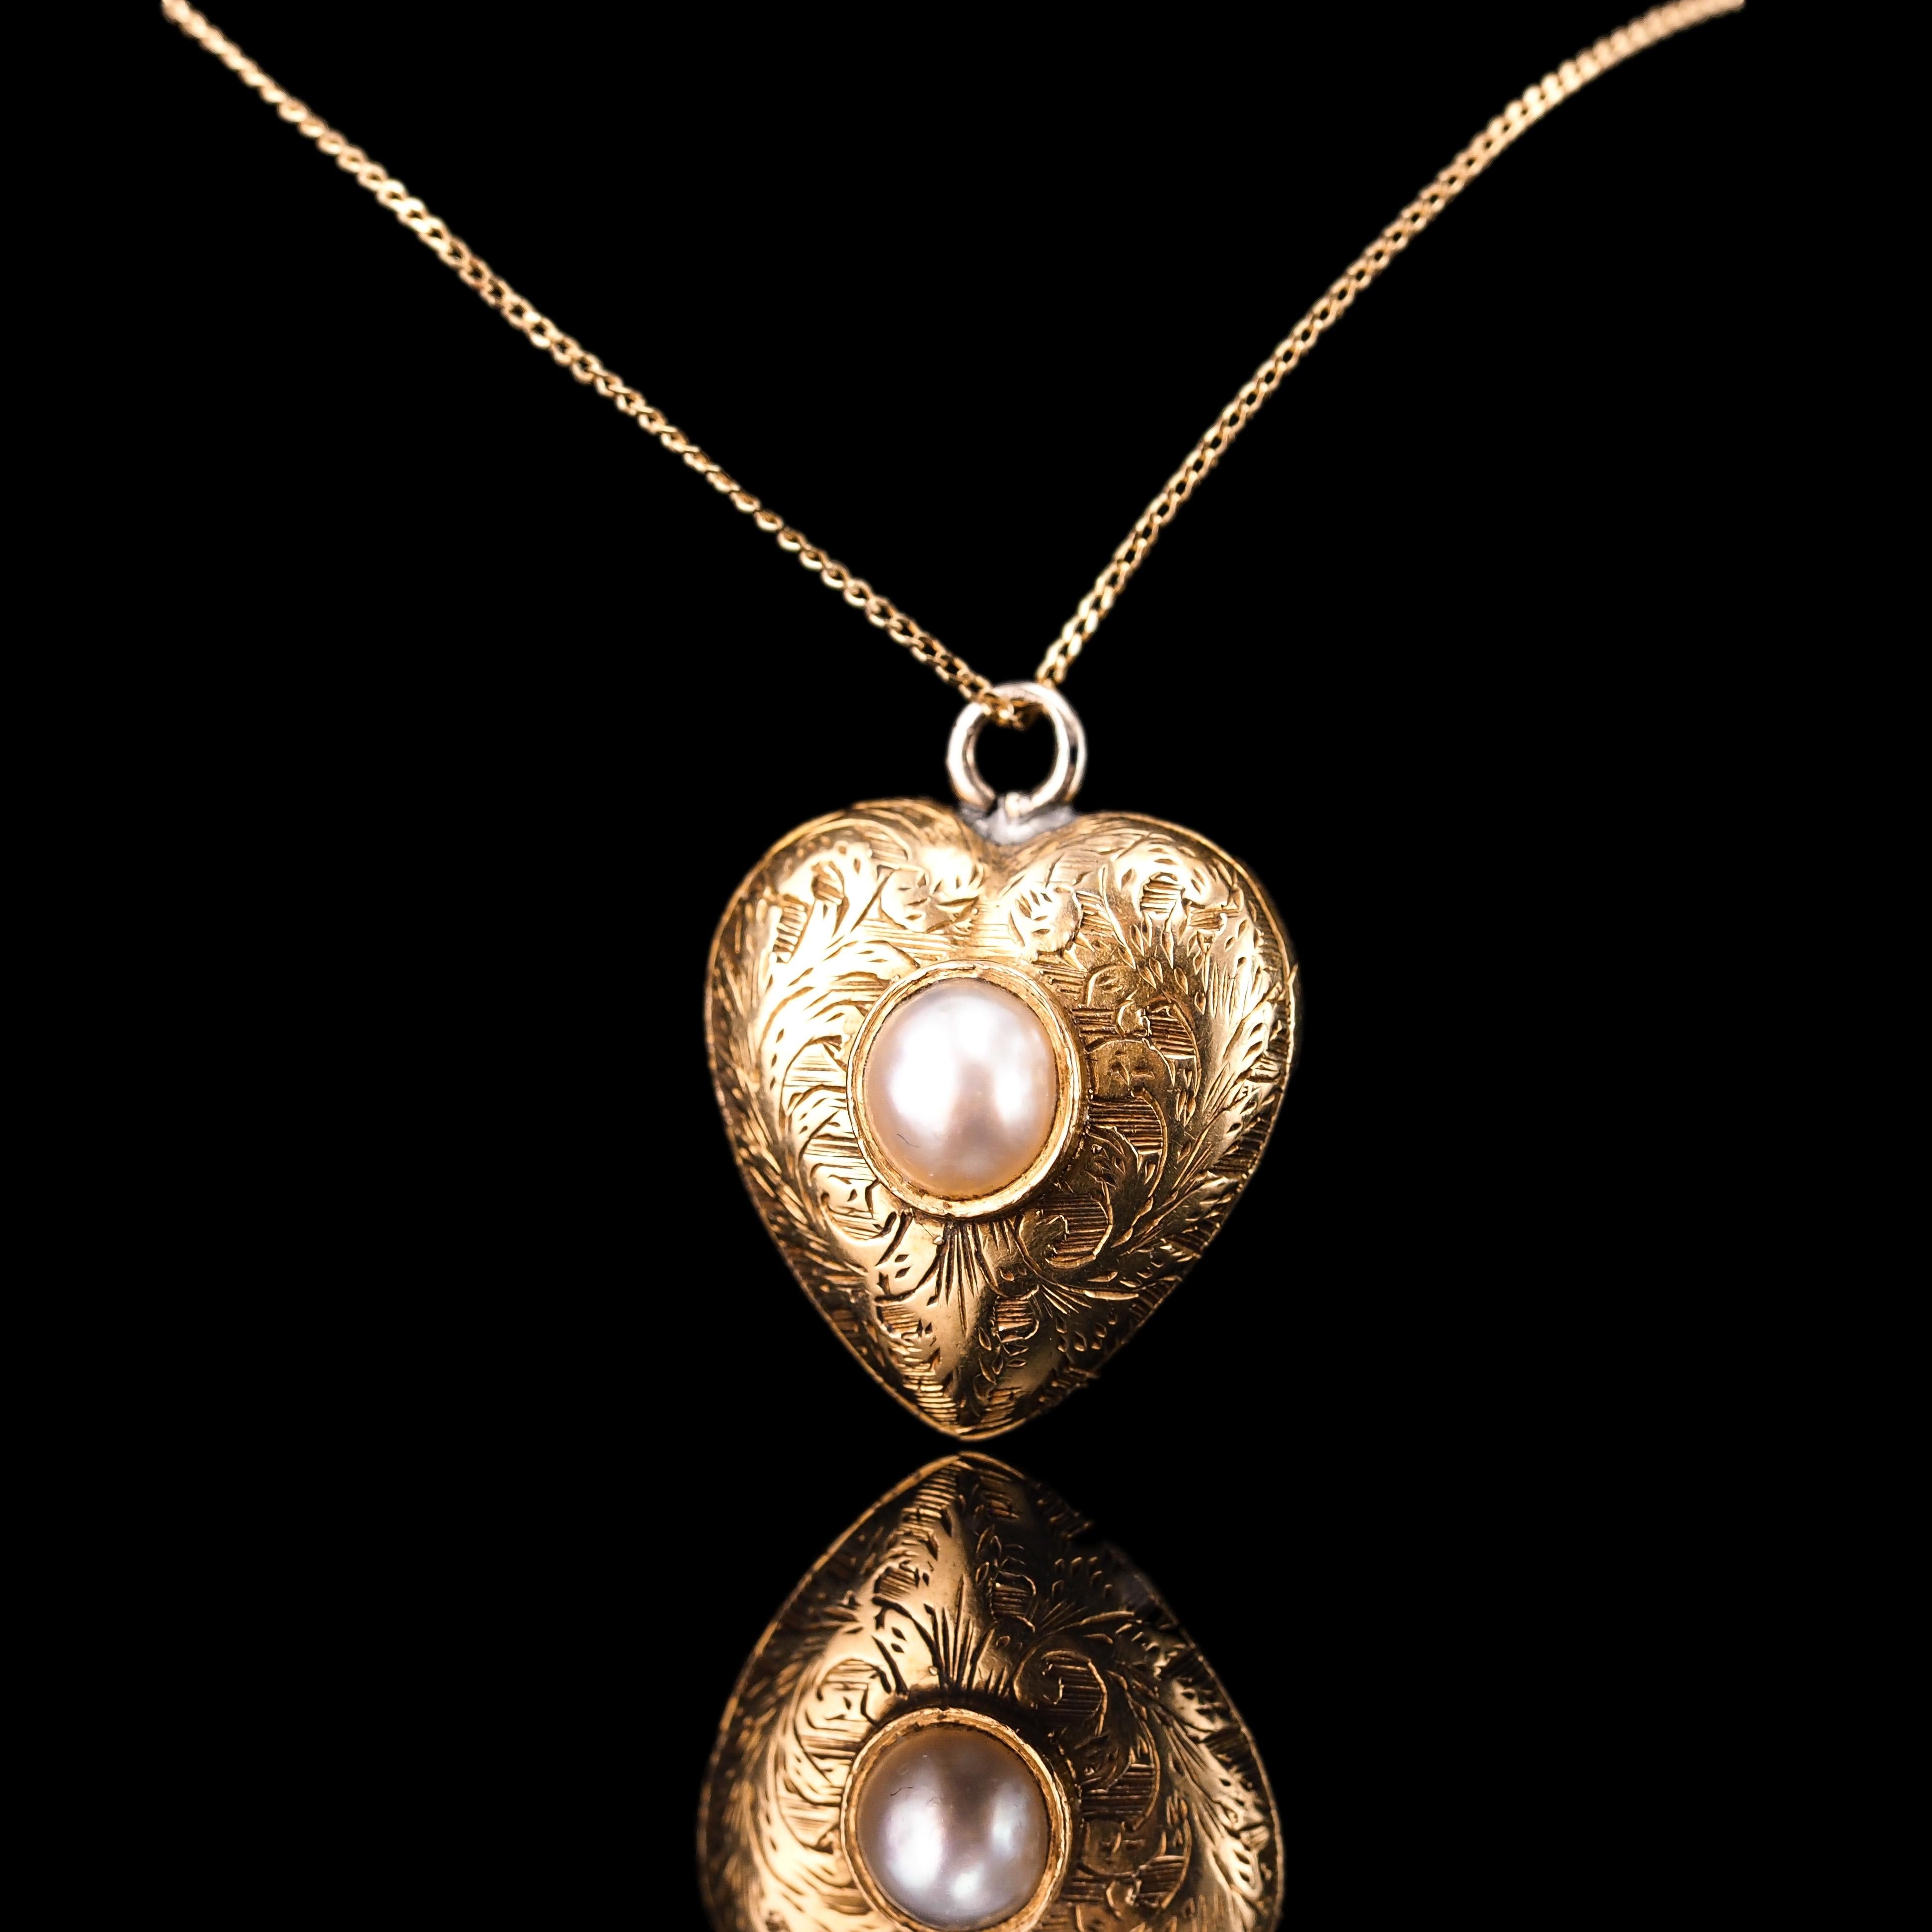 Antique 18K Gold Heart Charm Pendant Necklace with Pearl - Victorian c.1890 6